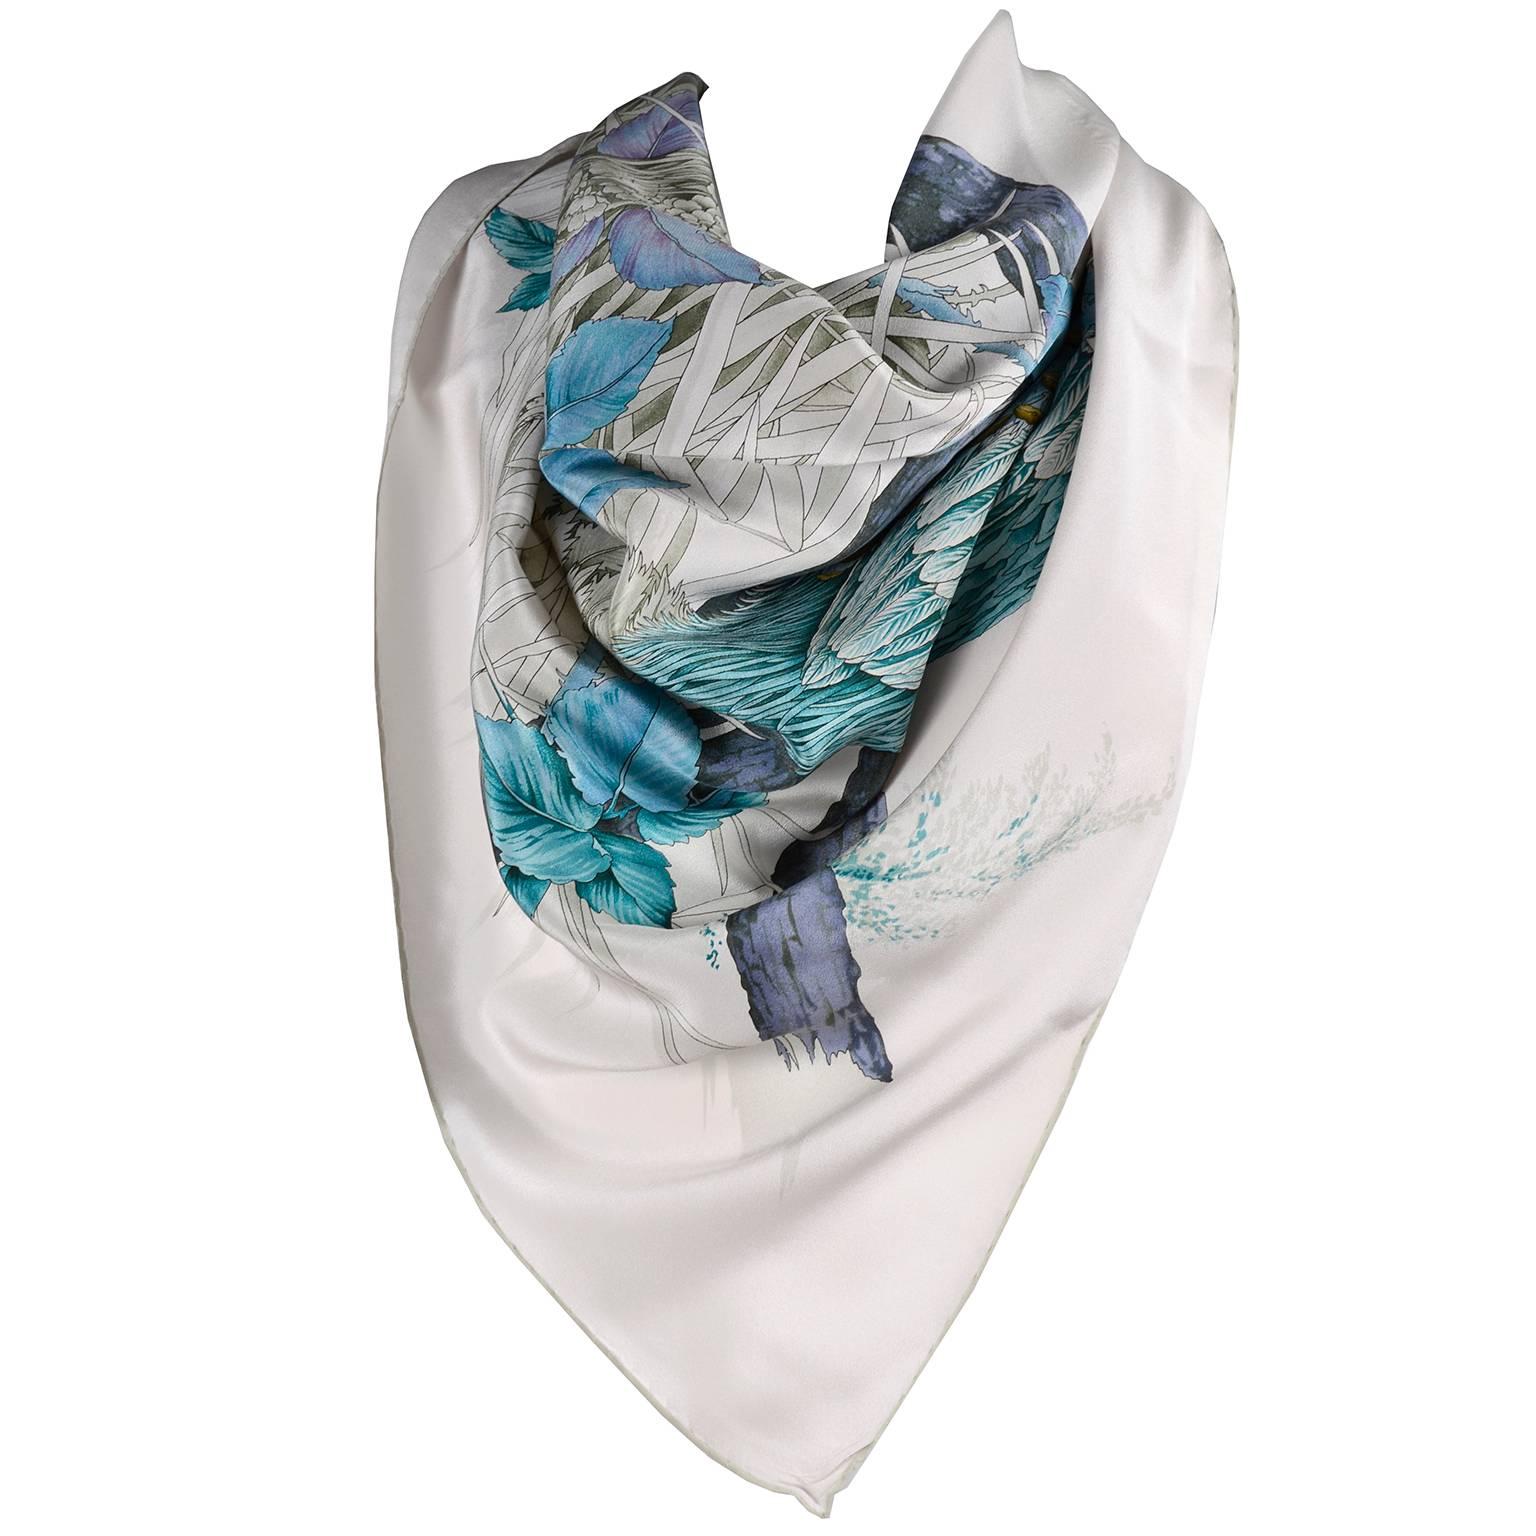 This beautiful Salvatore Ferragamo vintage scarf is in a dove gray silk print with gorgeous pheasants, sea grass and beautiful blue flowers. The scarf measures 34